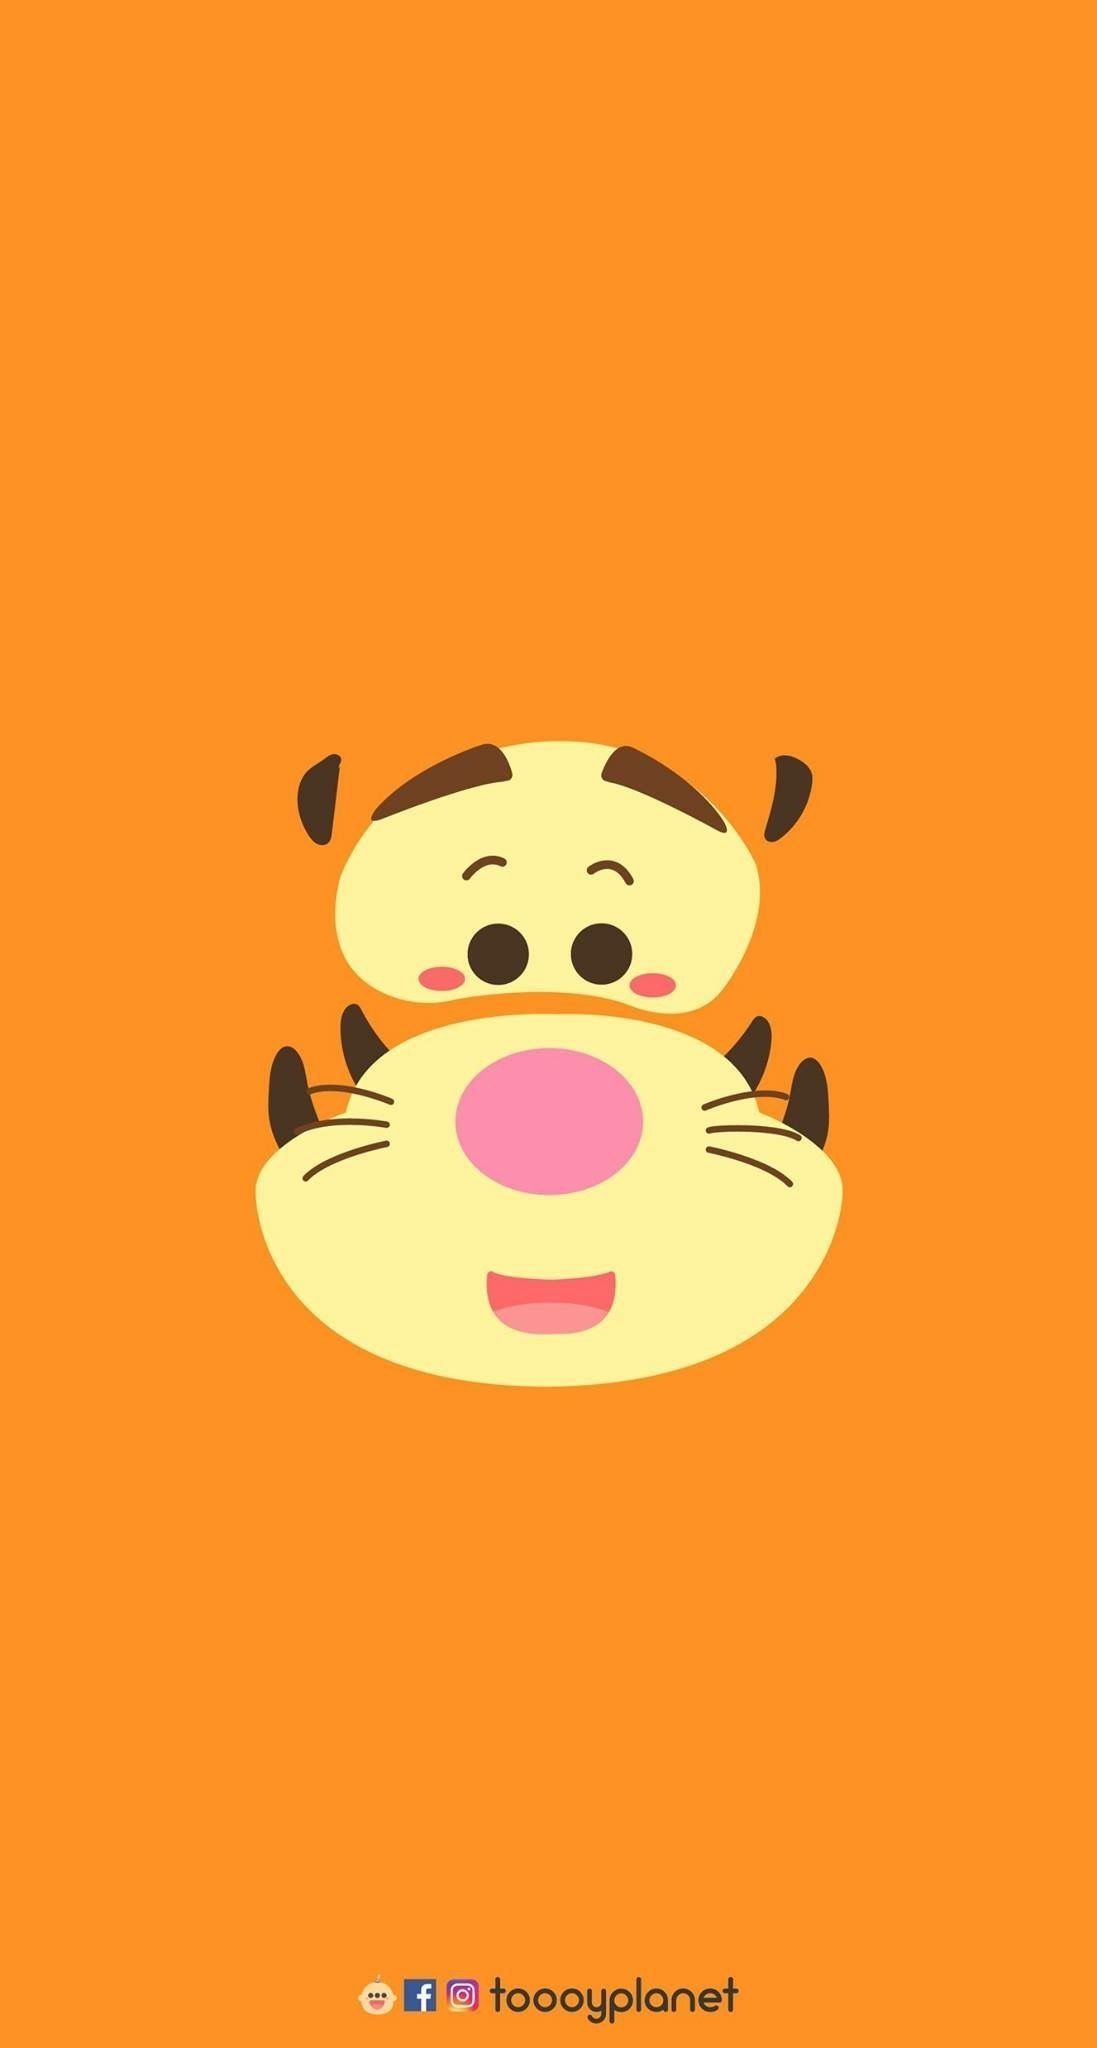 Tigger Wallpaper On Wallpaperplay within The Most Incredible